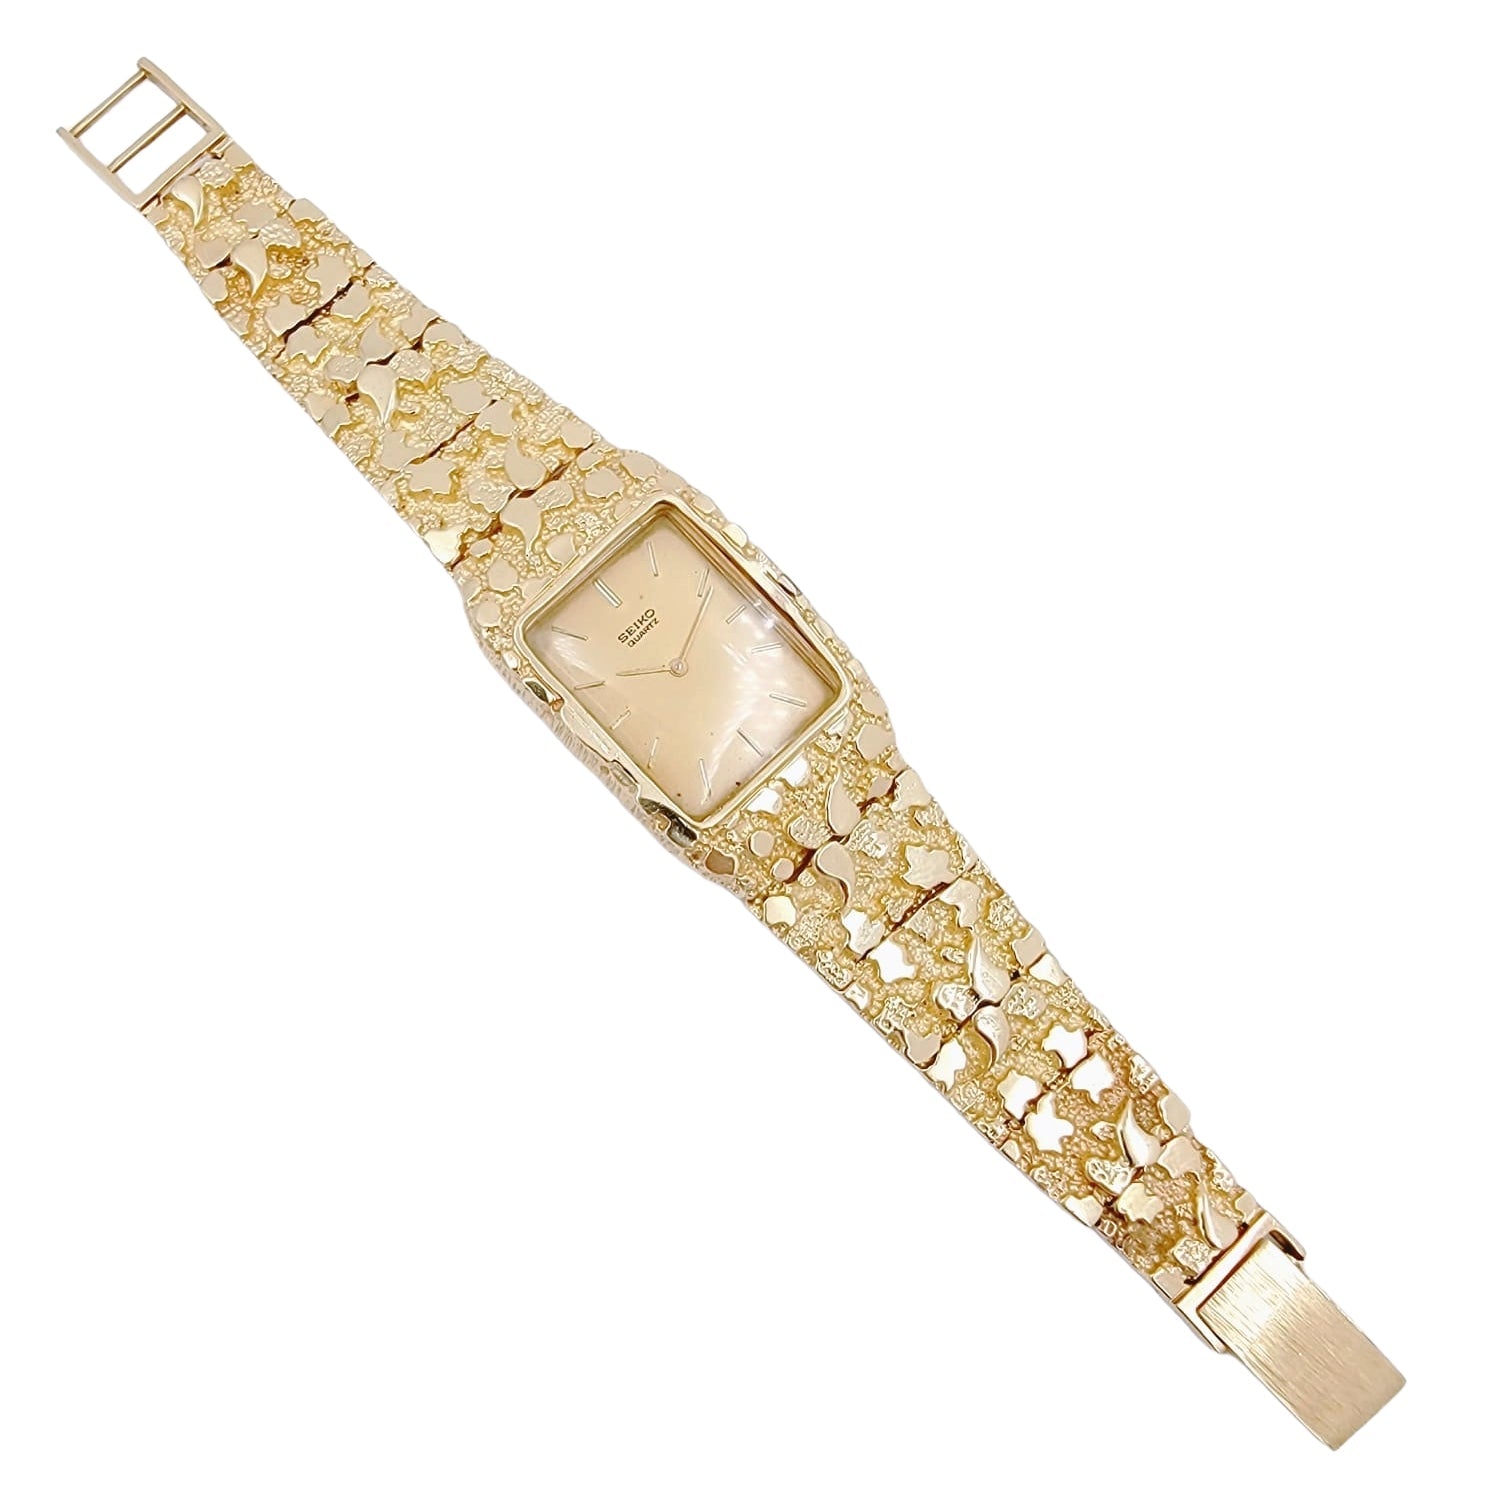 Men's Seiko 27mm x 46mm Vintage 14K Yellow Gold Nugget Watch with Champagne Dial. (Pre-Owned E3720)